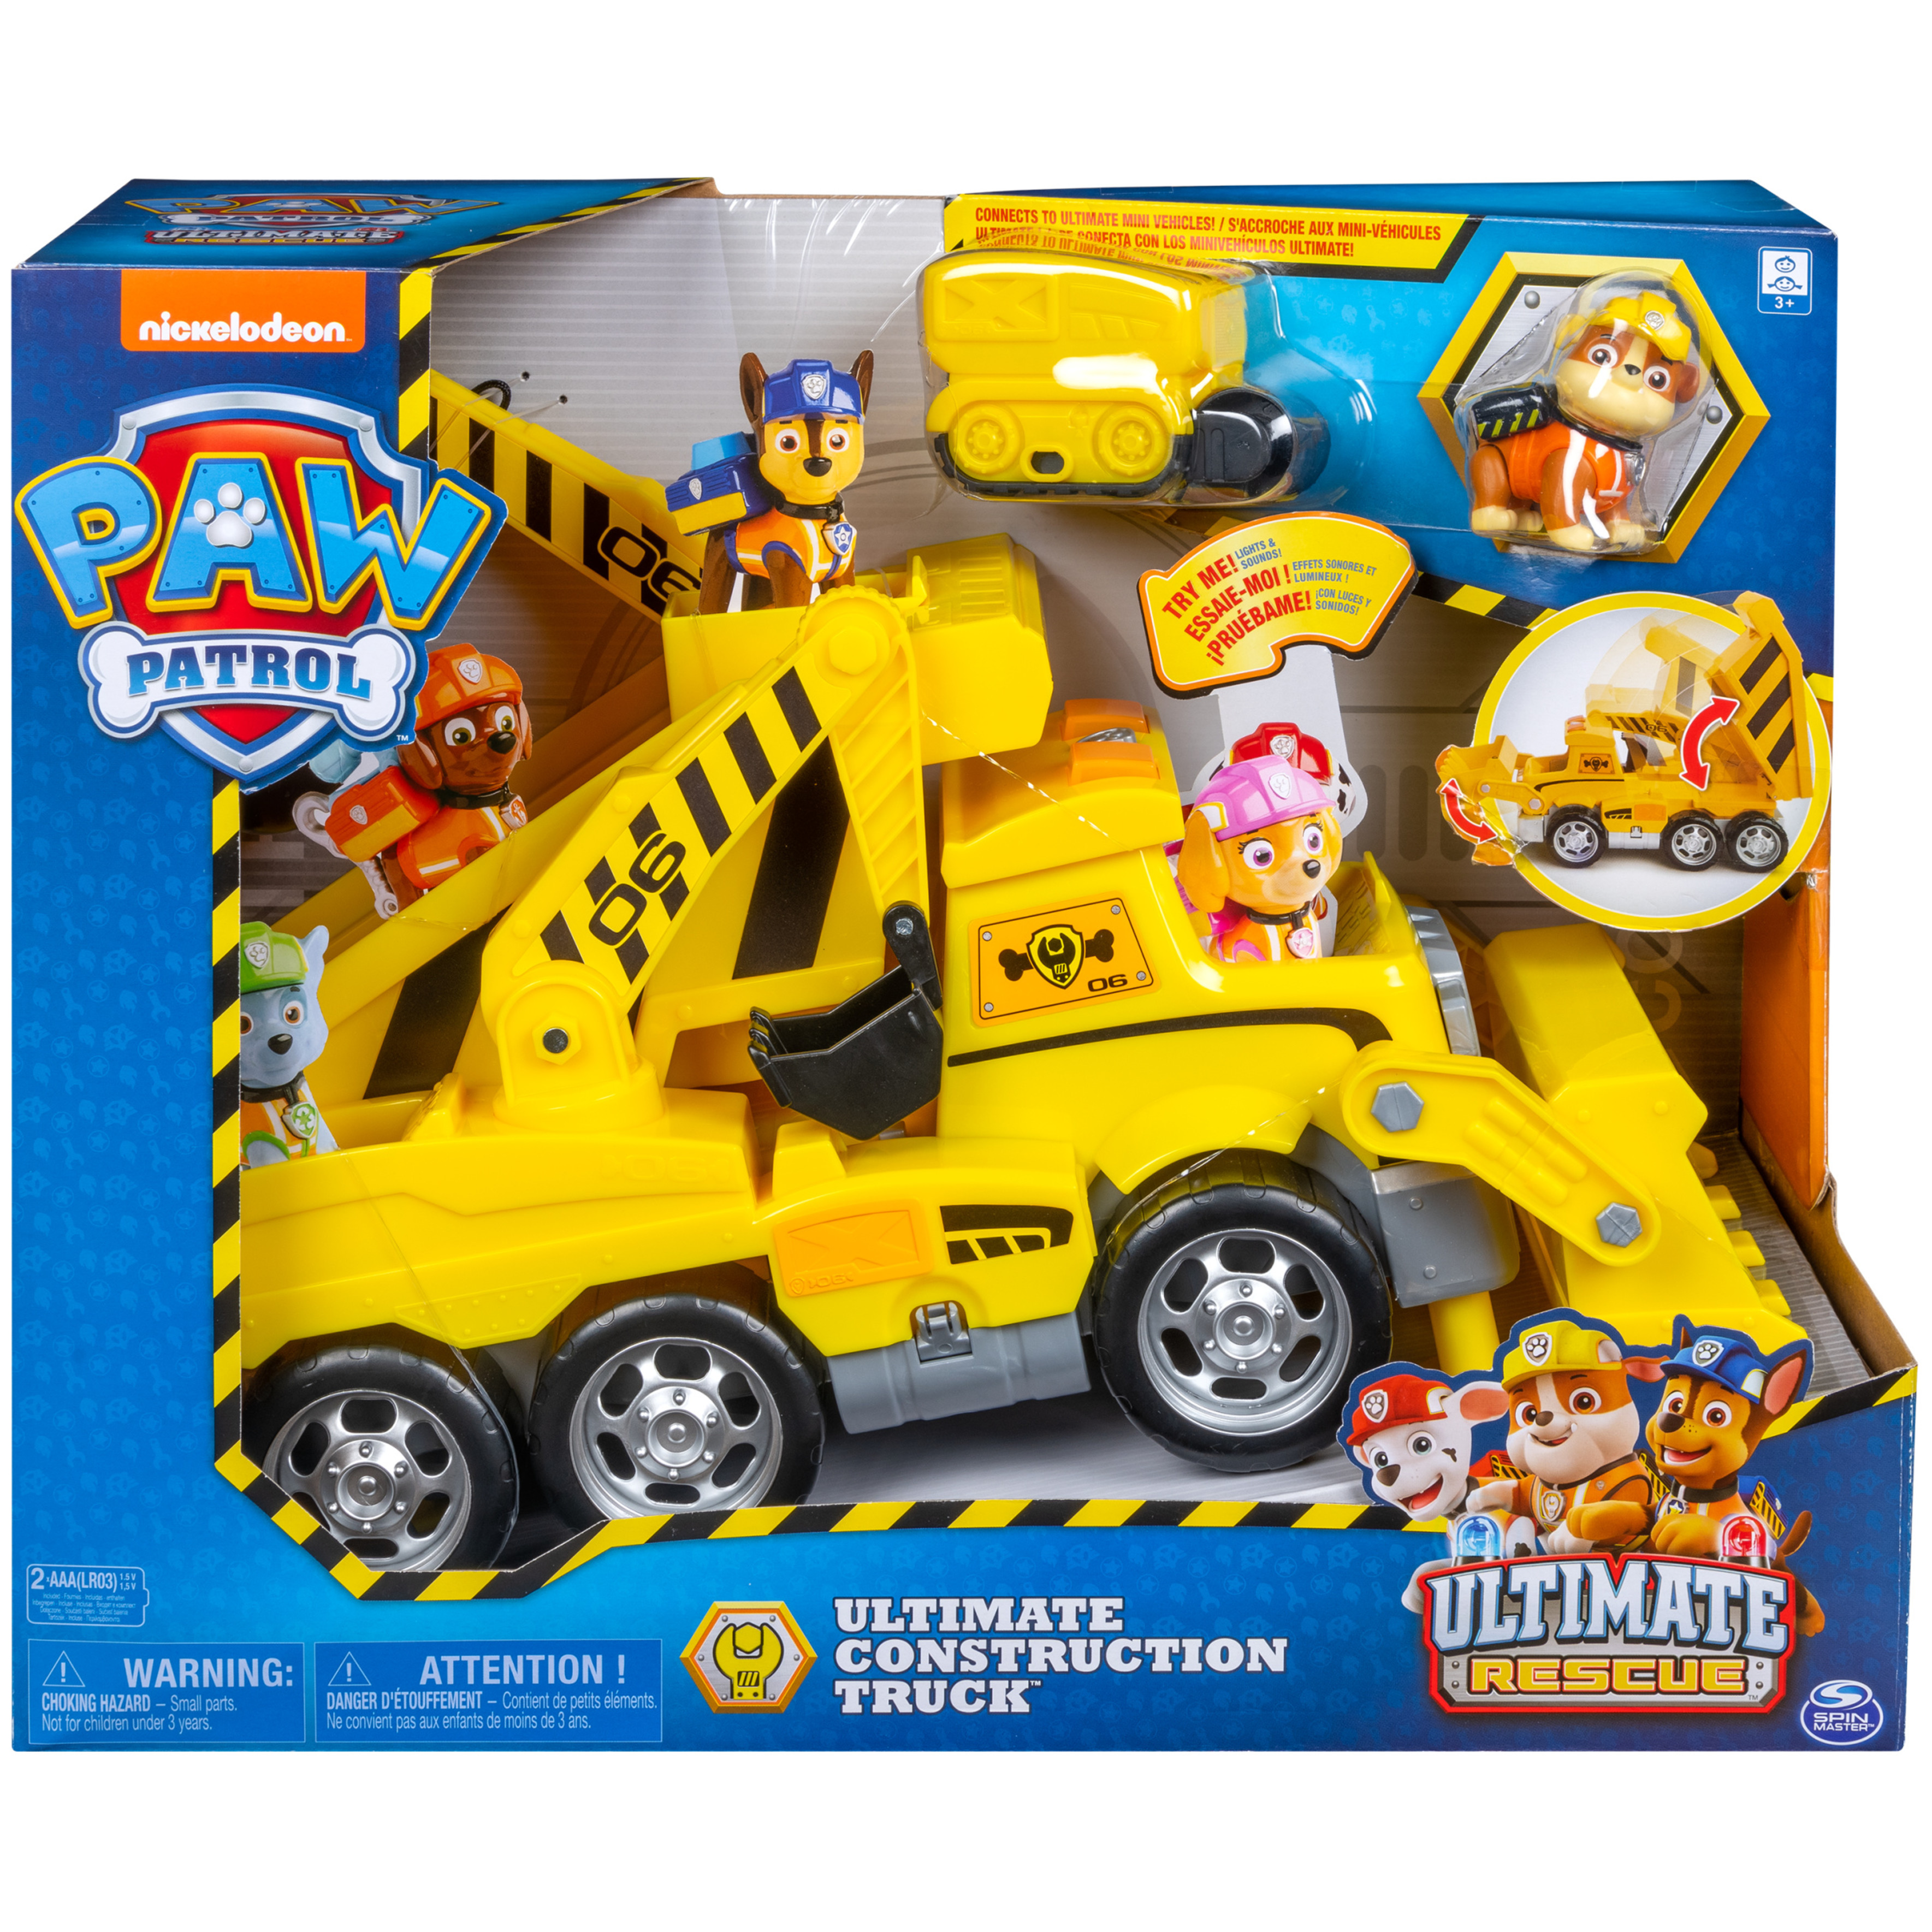 PAW Patrol, Rubble's Construction Truck with Mini Vehicle and Figure, For Ages 3 and up - image 2 of 8